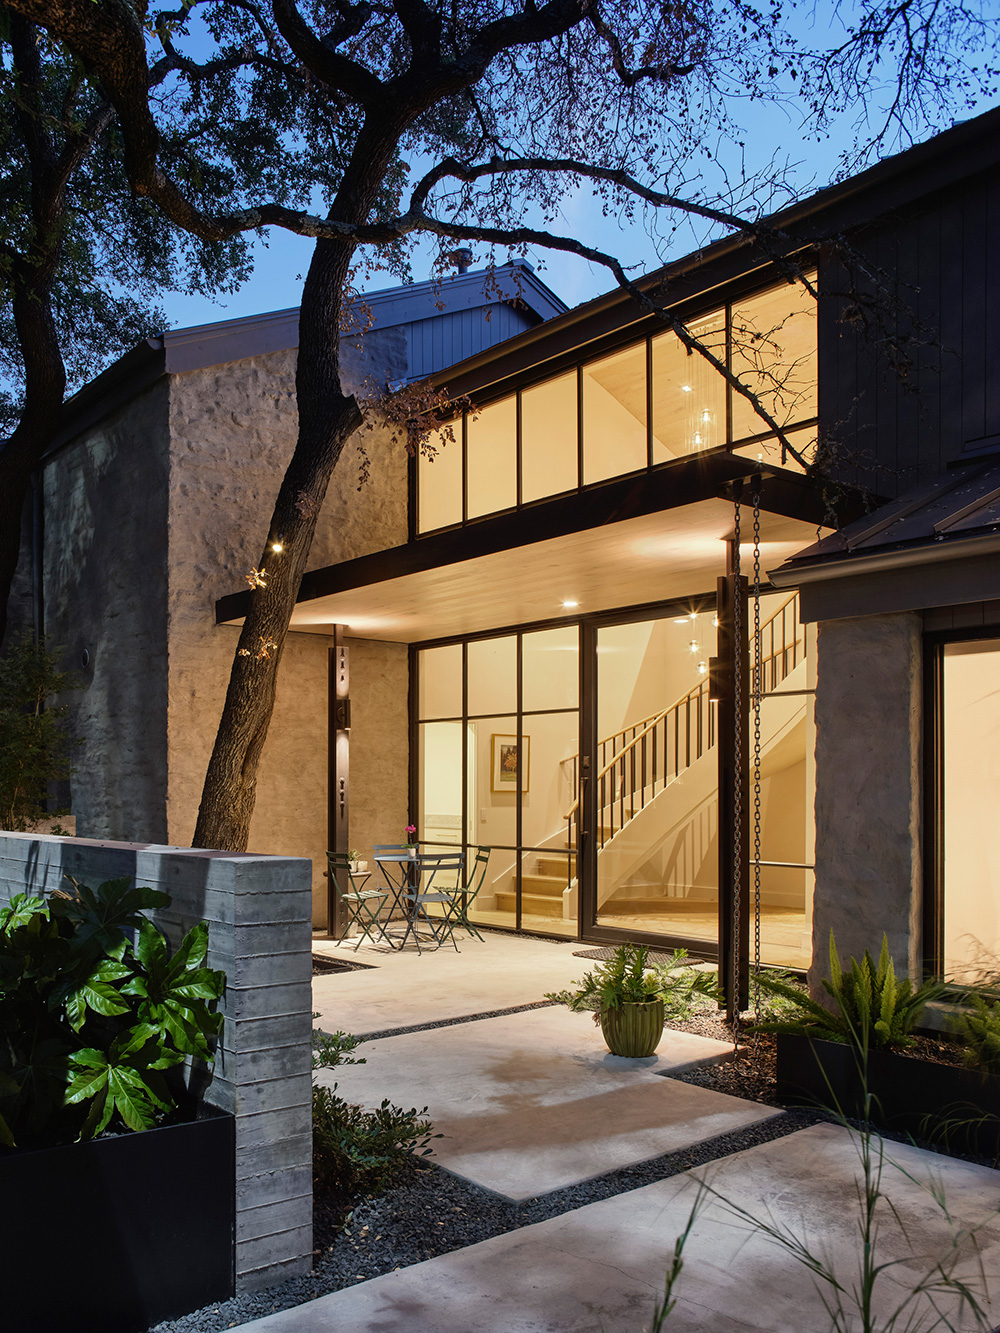 Concrete front patio and entrance of a home at dusk.